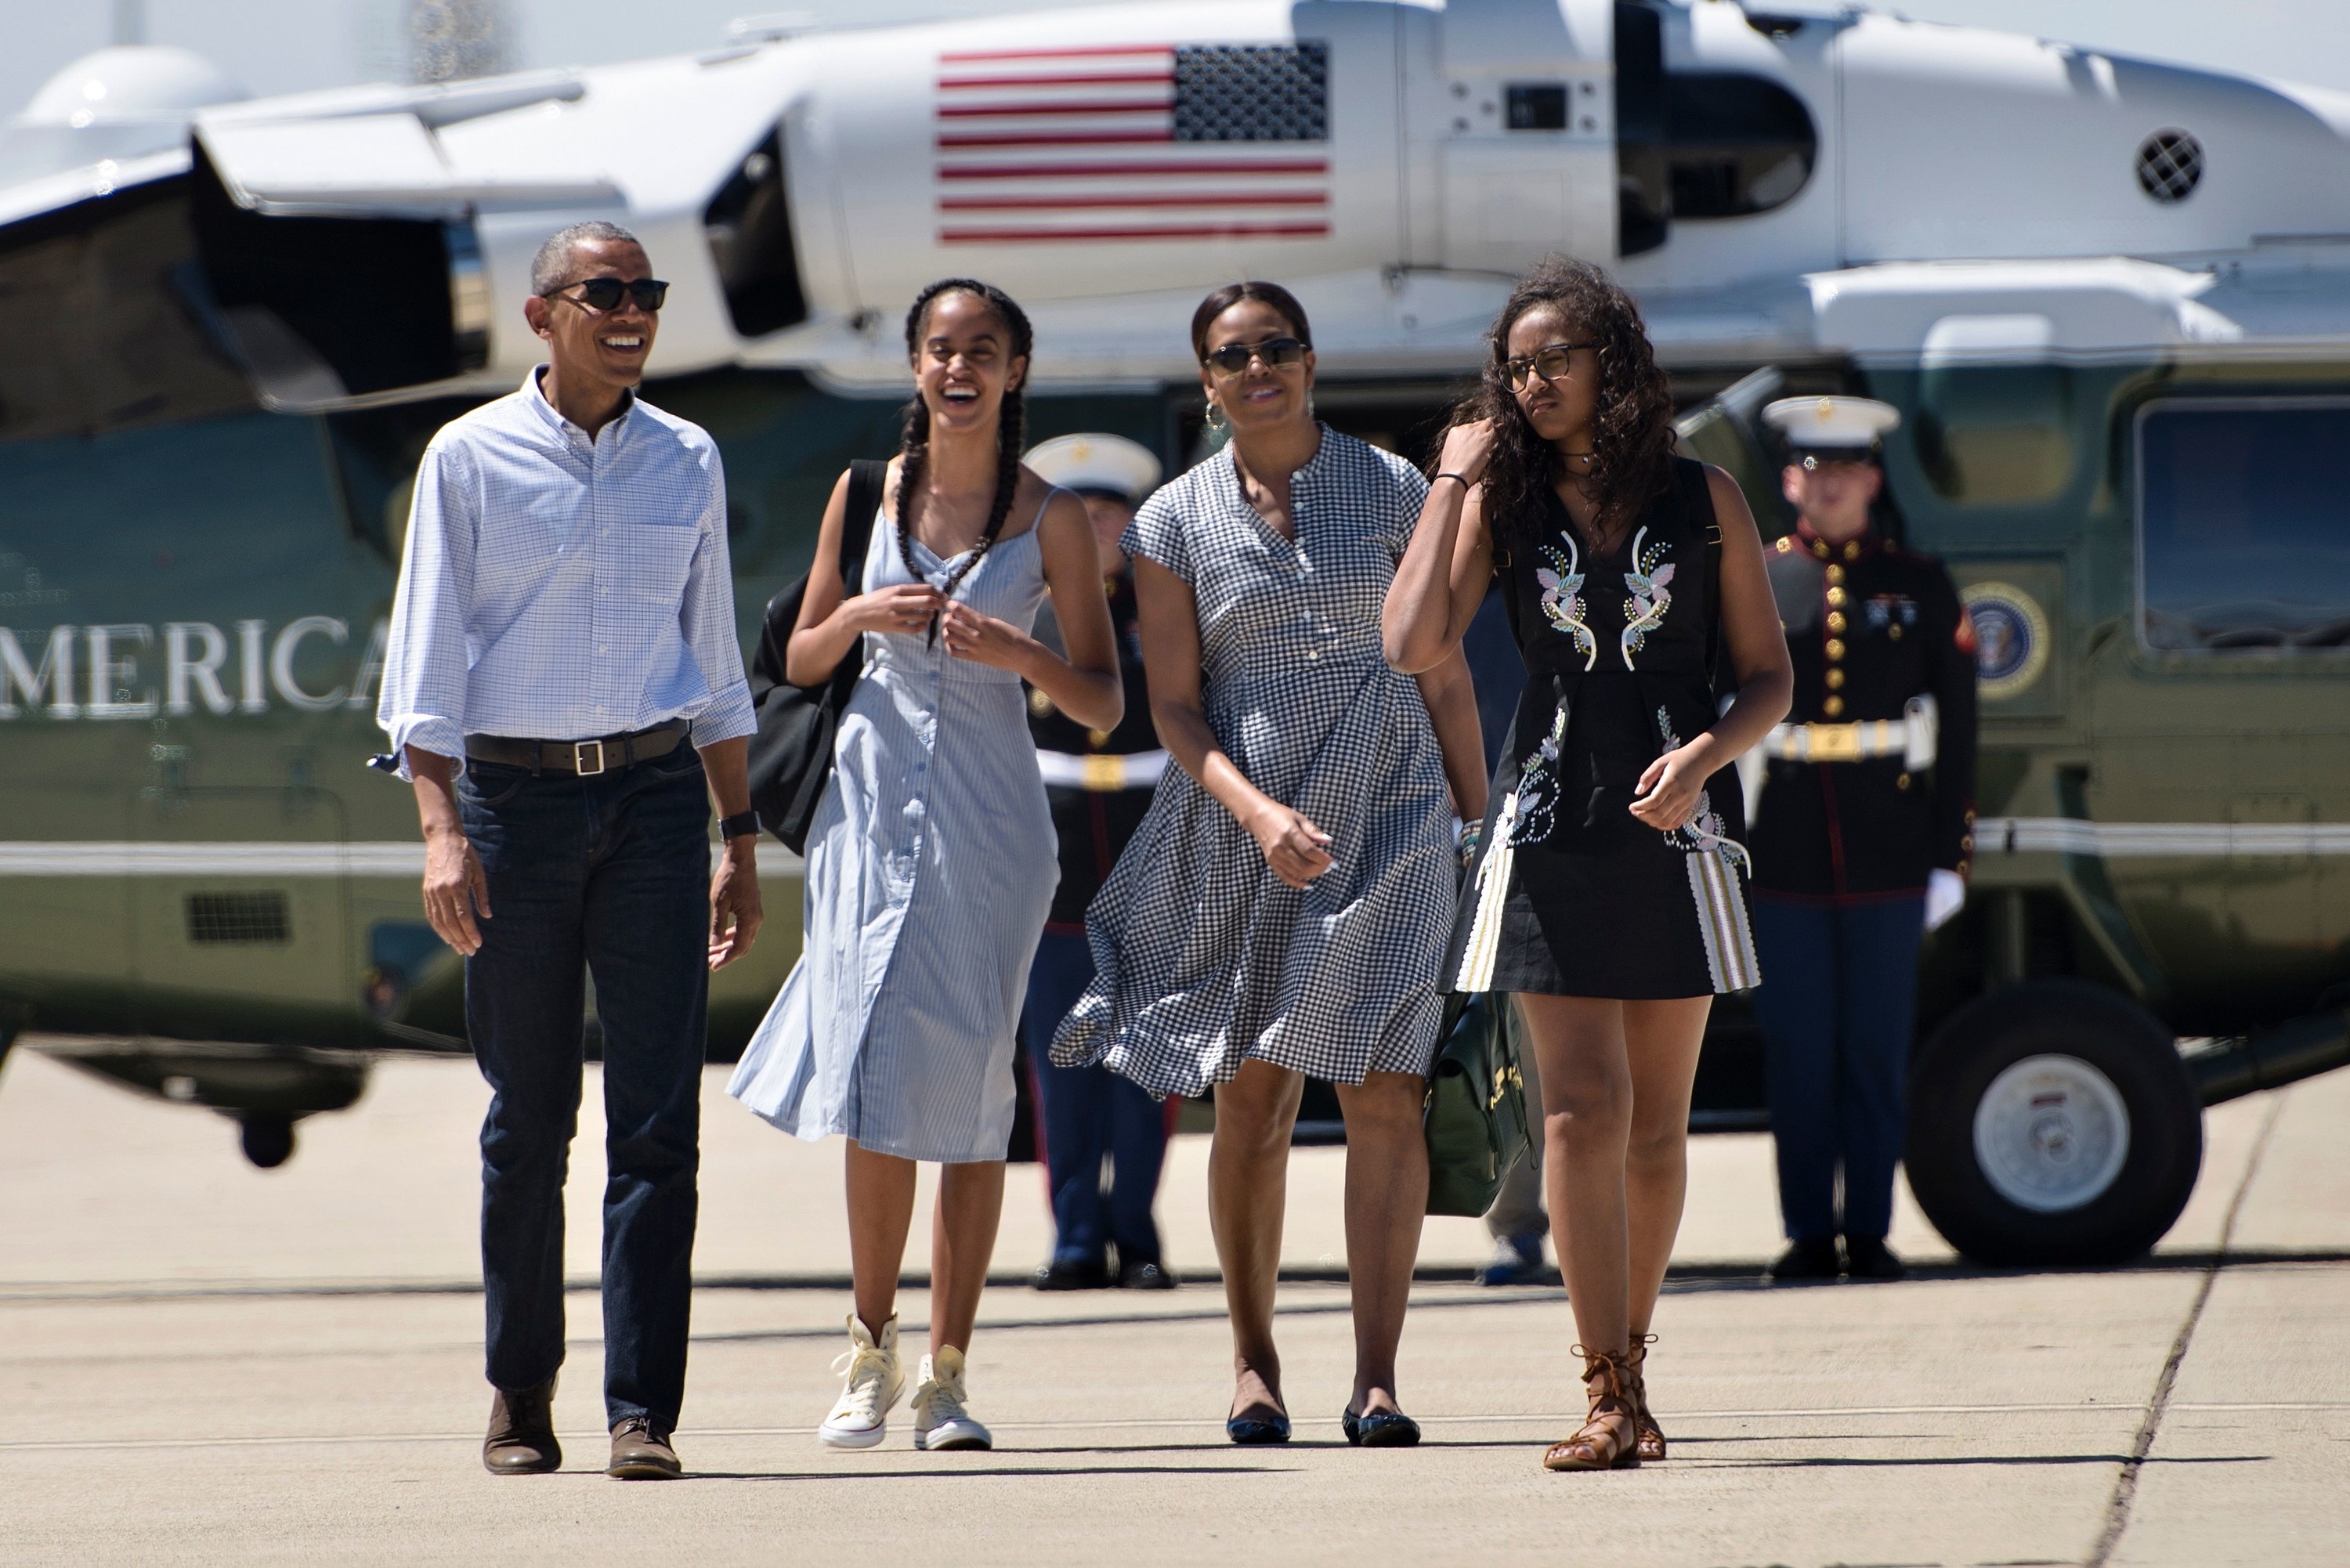 The former First Family smiling as they walk to Air Force One in 2016